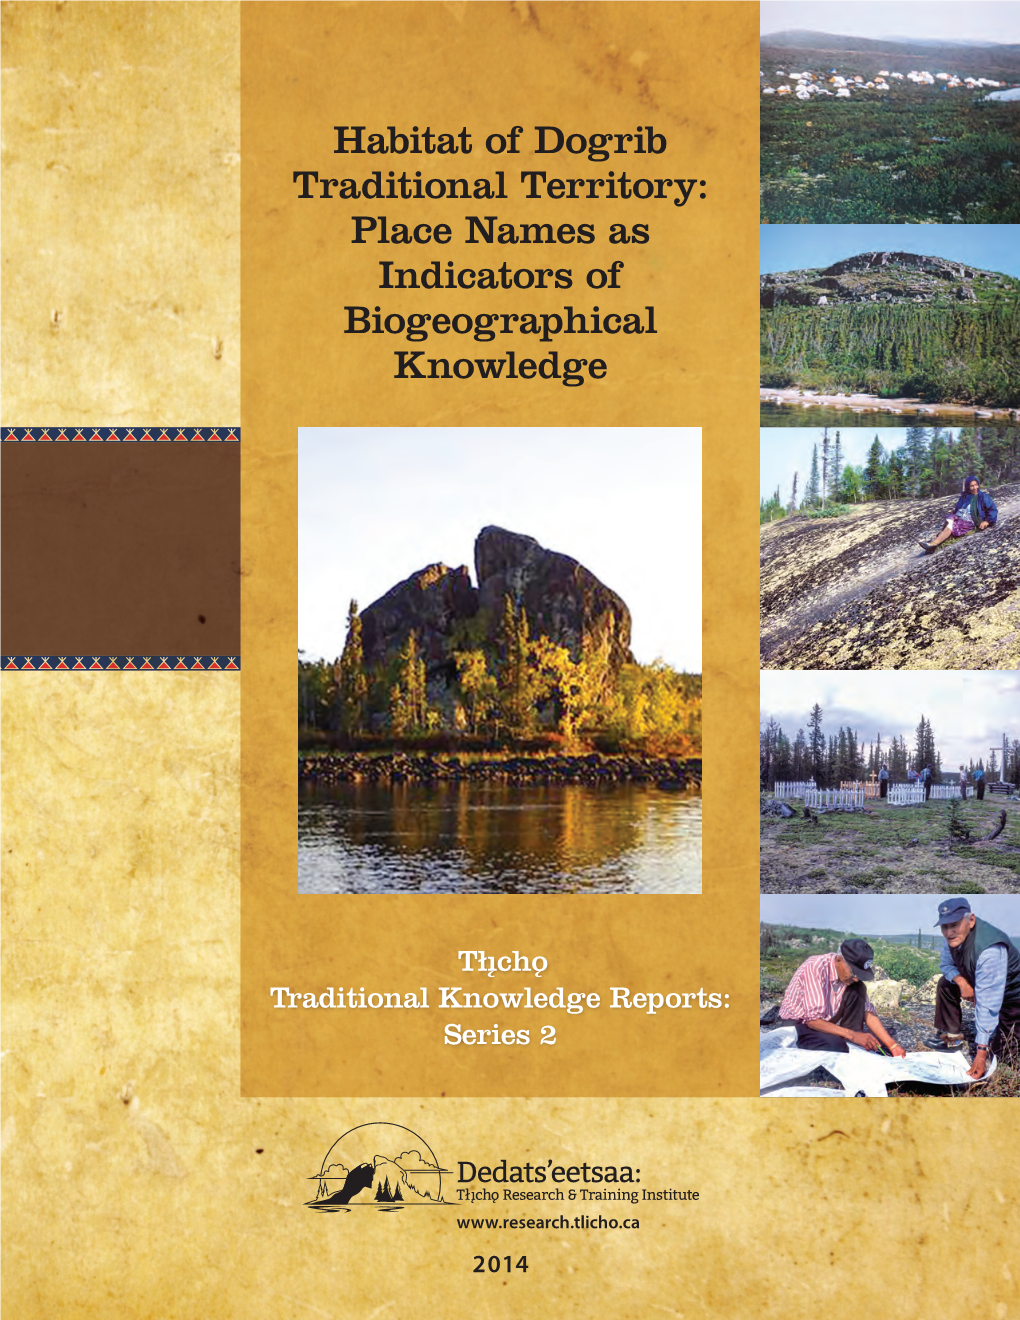 Habitat of Dogrib Traditional Territory: Place Names As Indicators of Biogeographical Knowledge